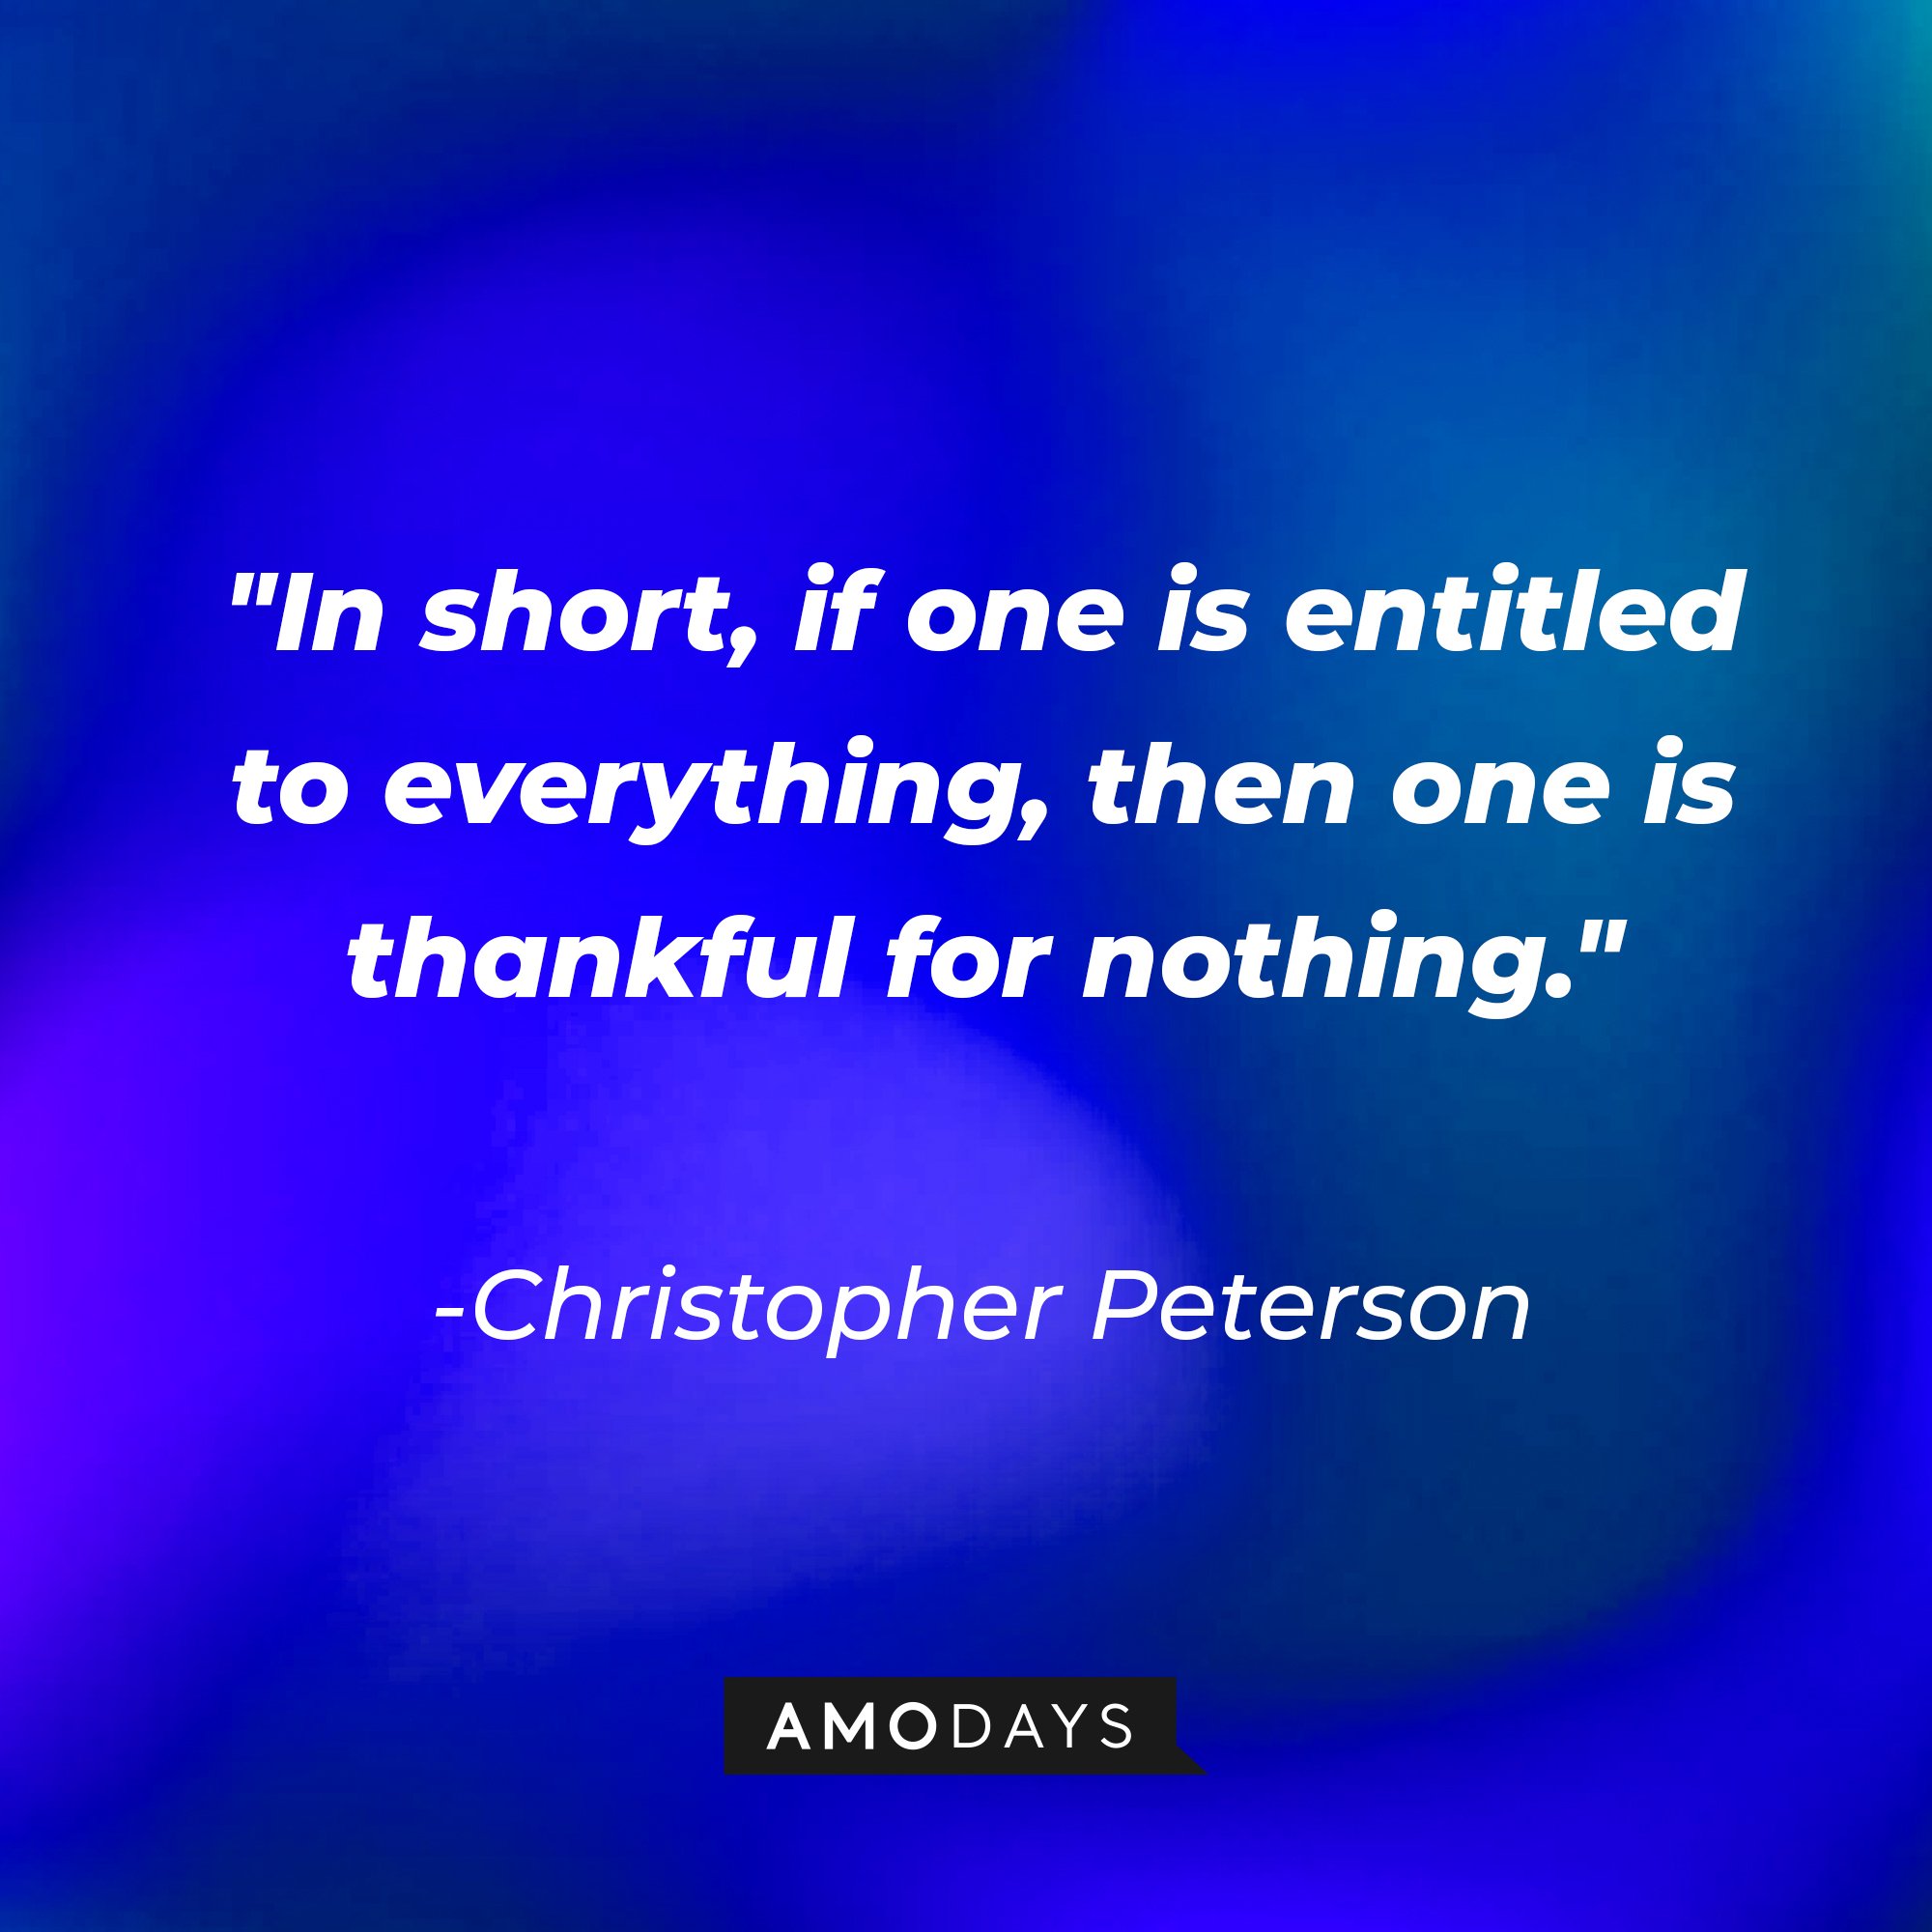 Christopher Peterson’s quote: "In short, if one is entitled to everything, then one is thankful for nothing." | Image: AmoDays